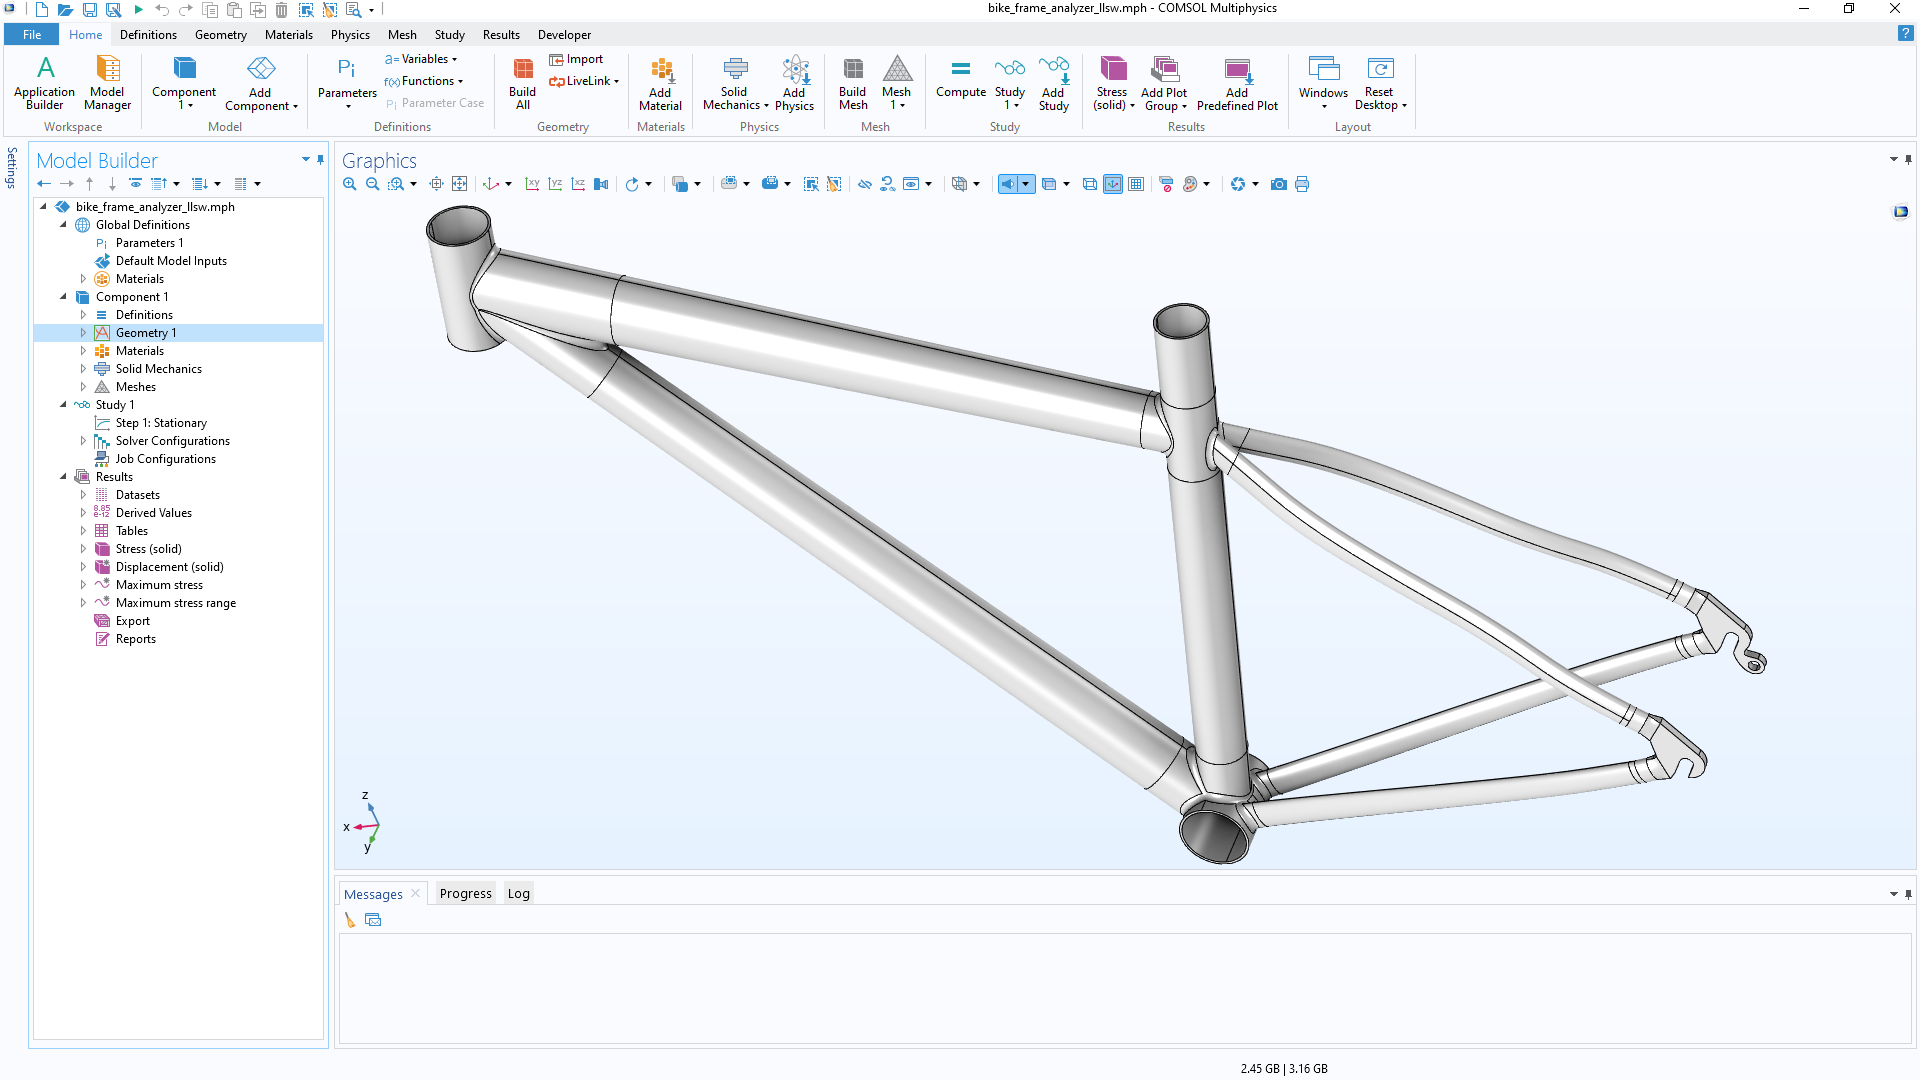 The geometry of a bike frame after being imported into COMSOL Multiphysics from CAD software.